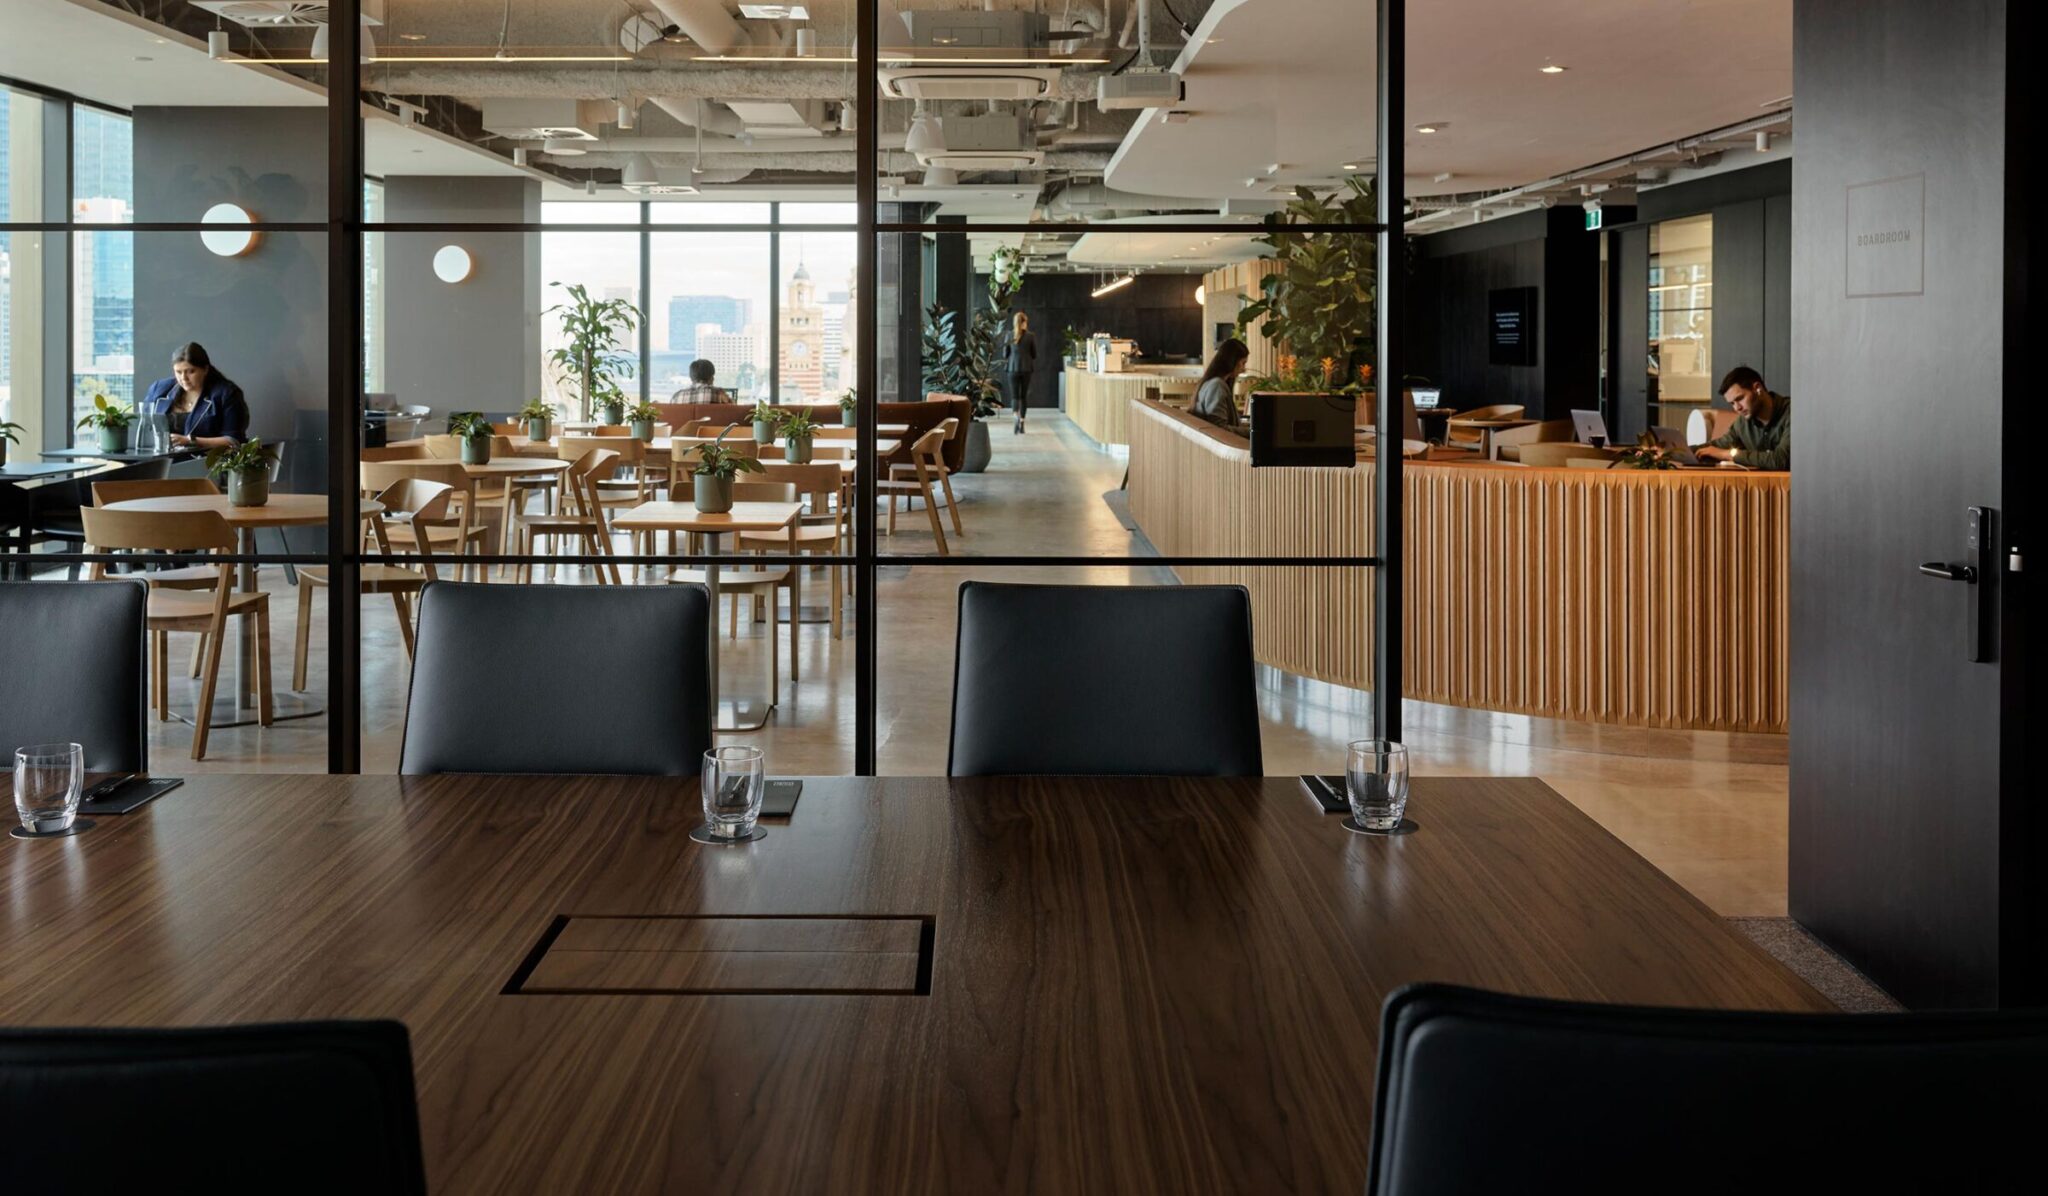  About Hub Australia We're Australia’s largest privately-owned flexible workspace operator, providing premium workspace solutions to help businesses and their teams love where they work.